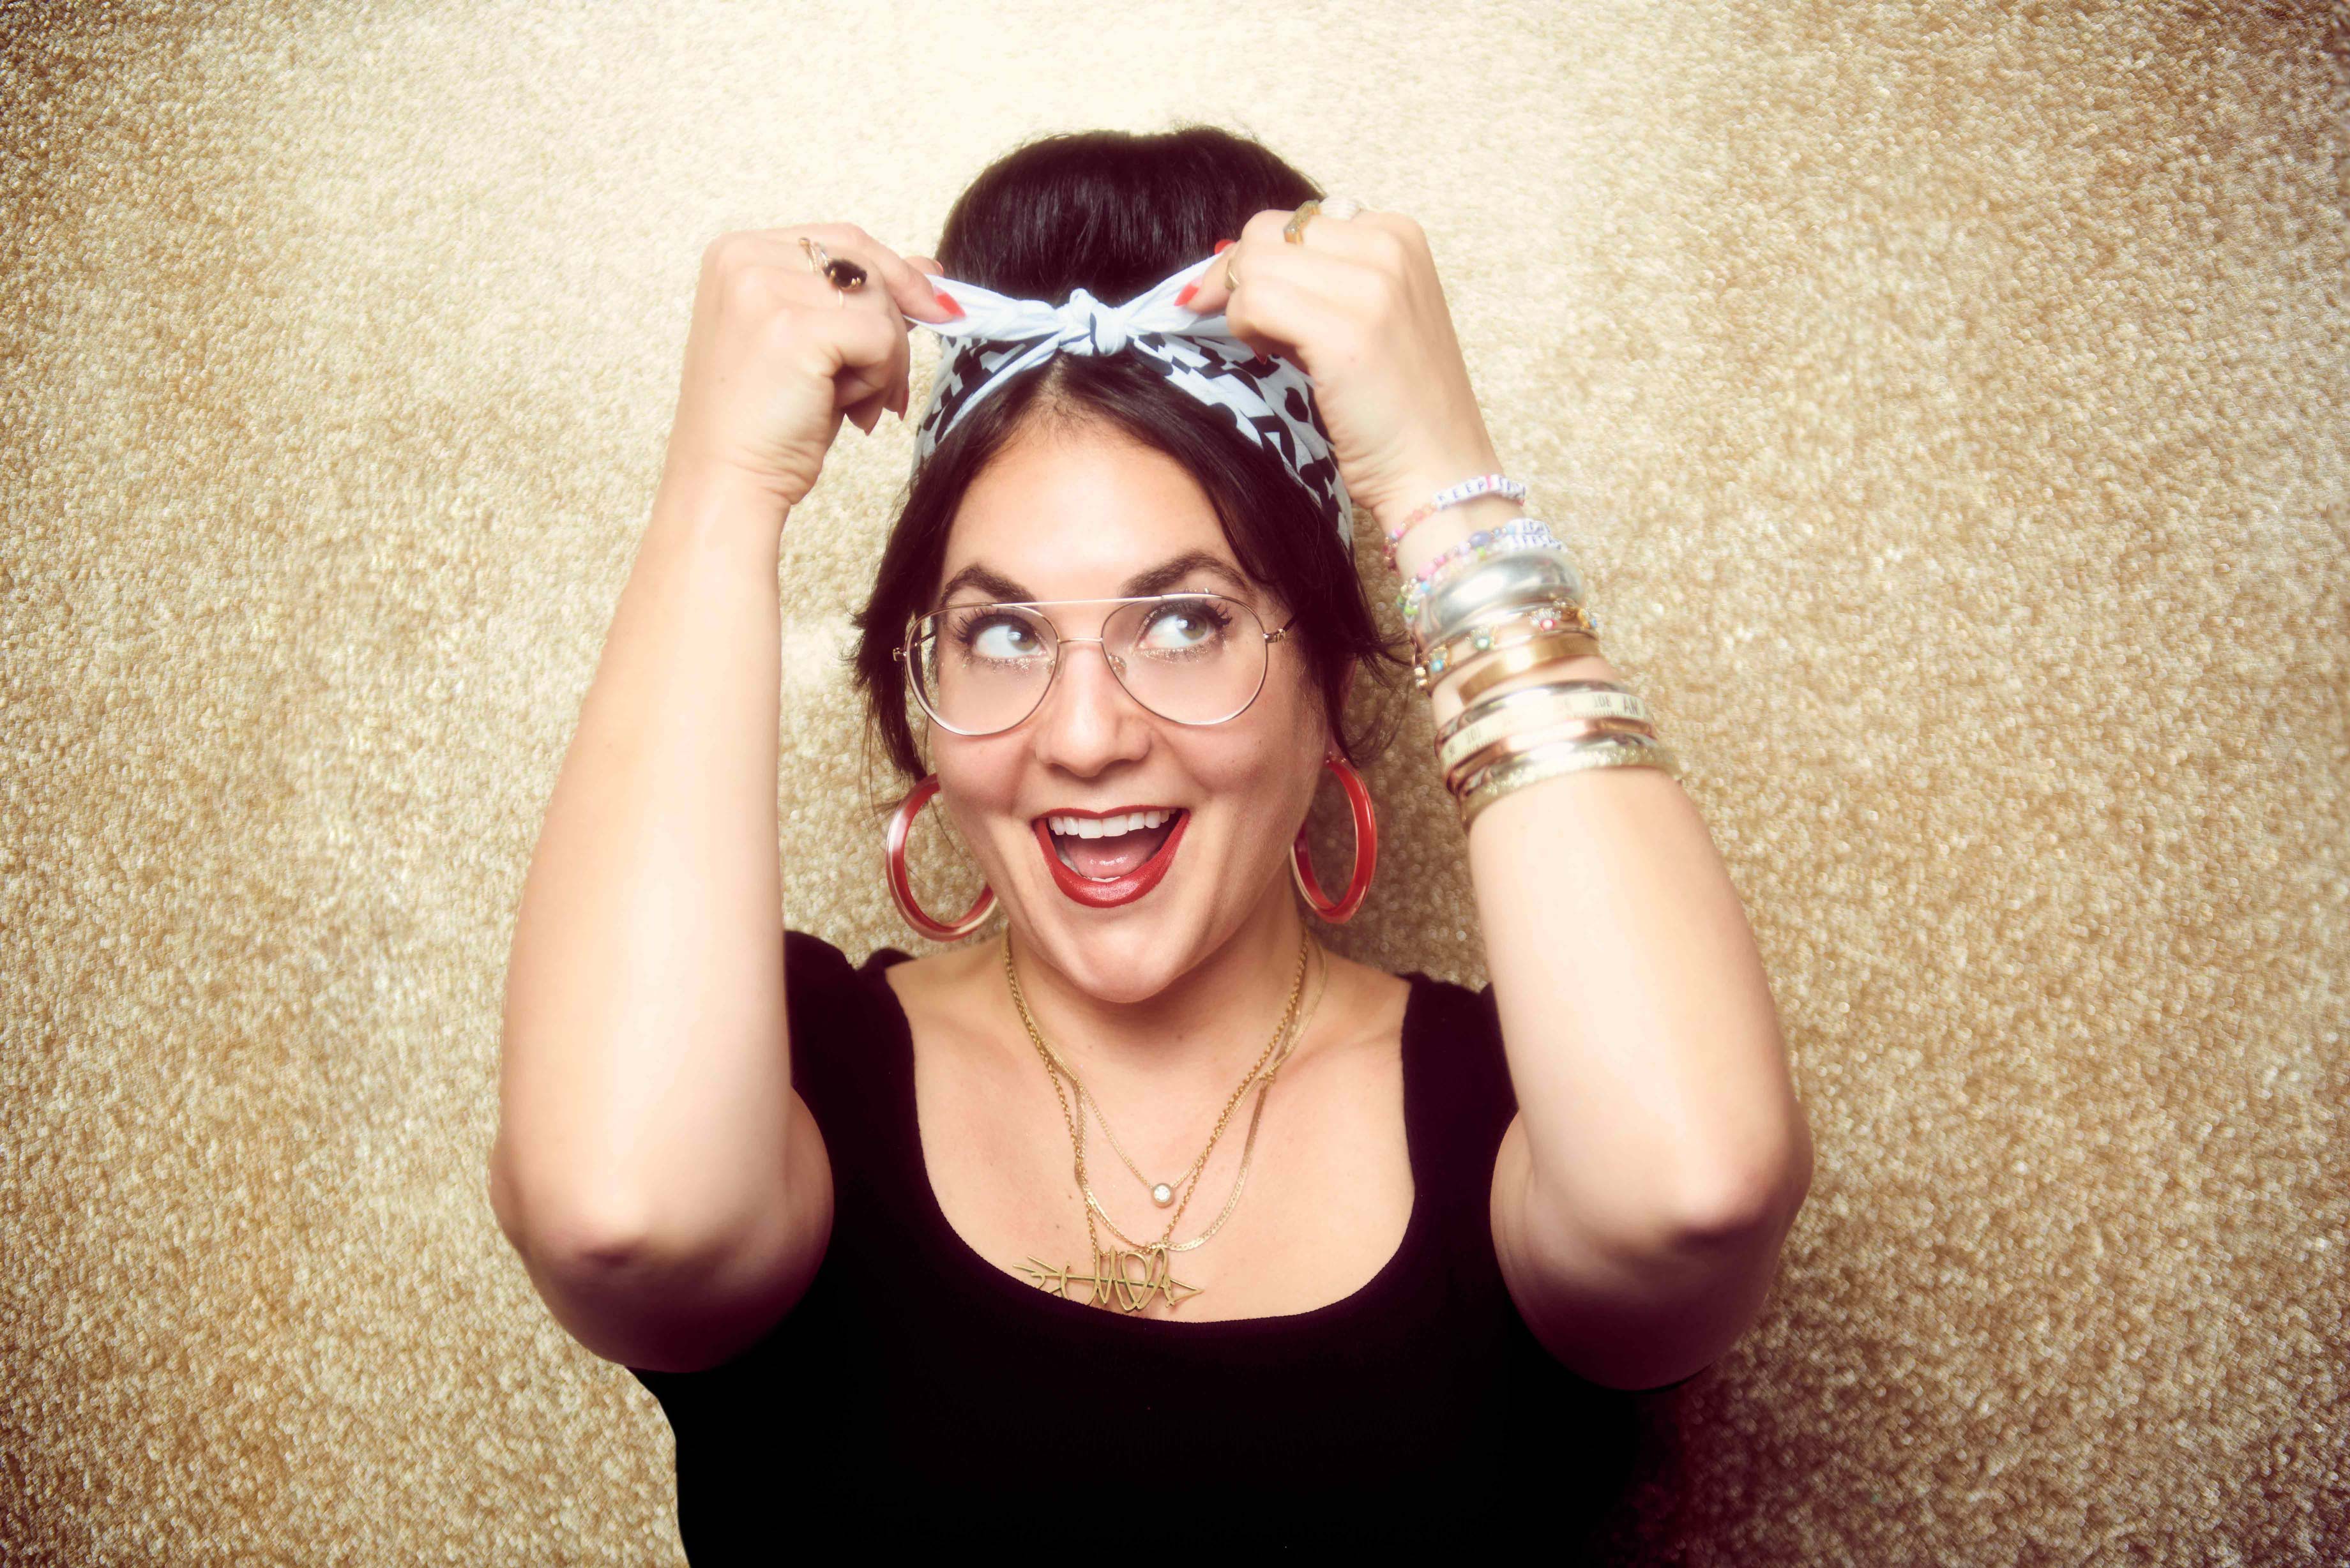 retro looking woman on a gold glitter background in a black top and gold chains. black and white doodle printed bandana is tied around her head and she has red hoop earrings and a stack of bracelets on